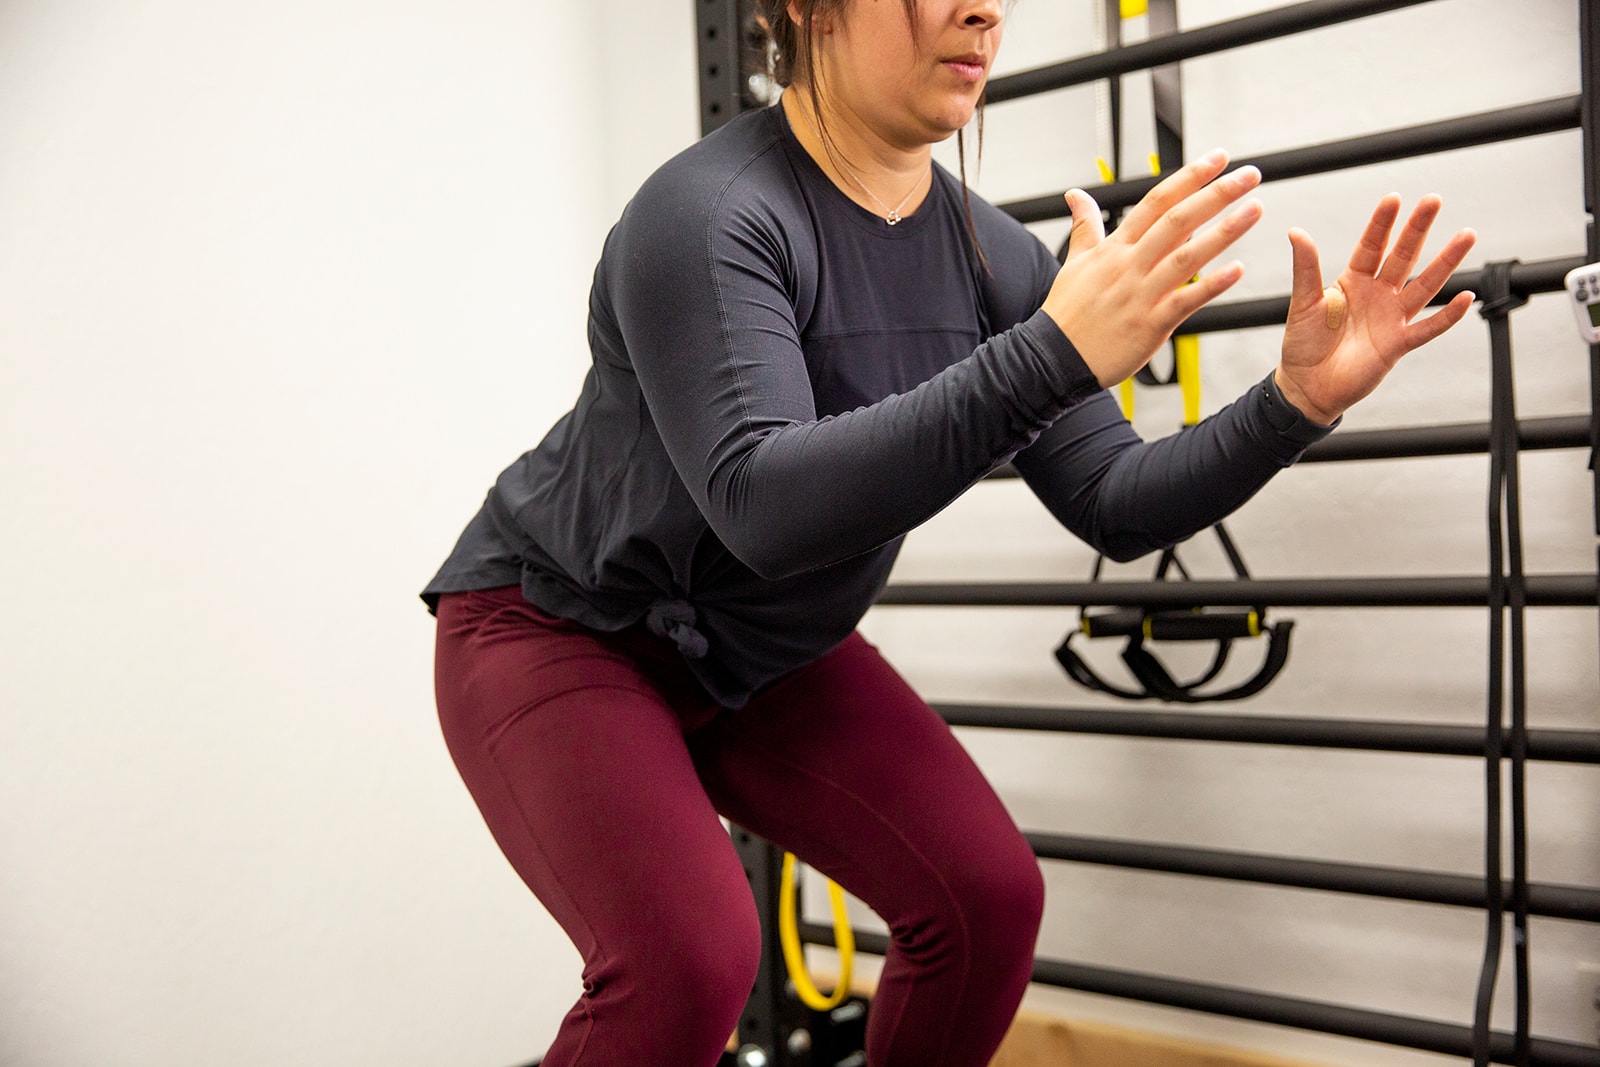 Using physical therapy exercises for ACL injury prevention